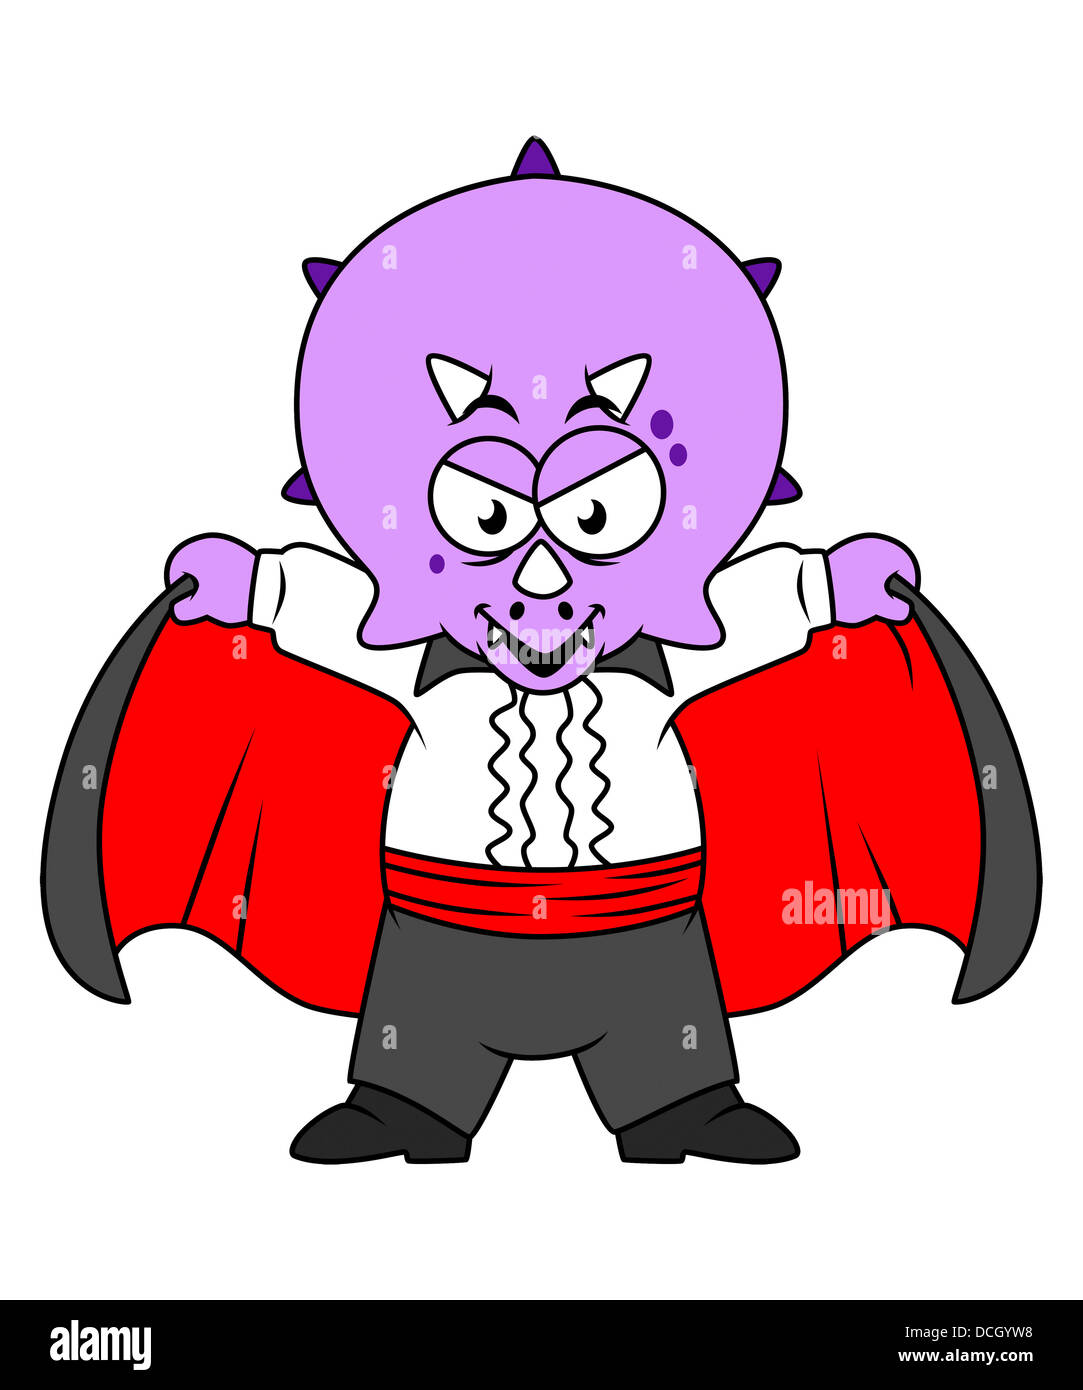 Cartoon illustration of a Ceratops dinosaur dressed up as Count Dracula. Stock Photo